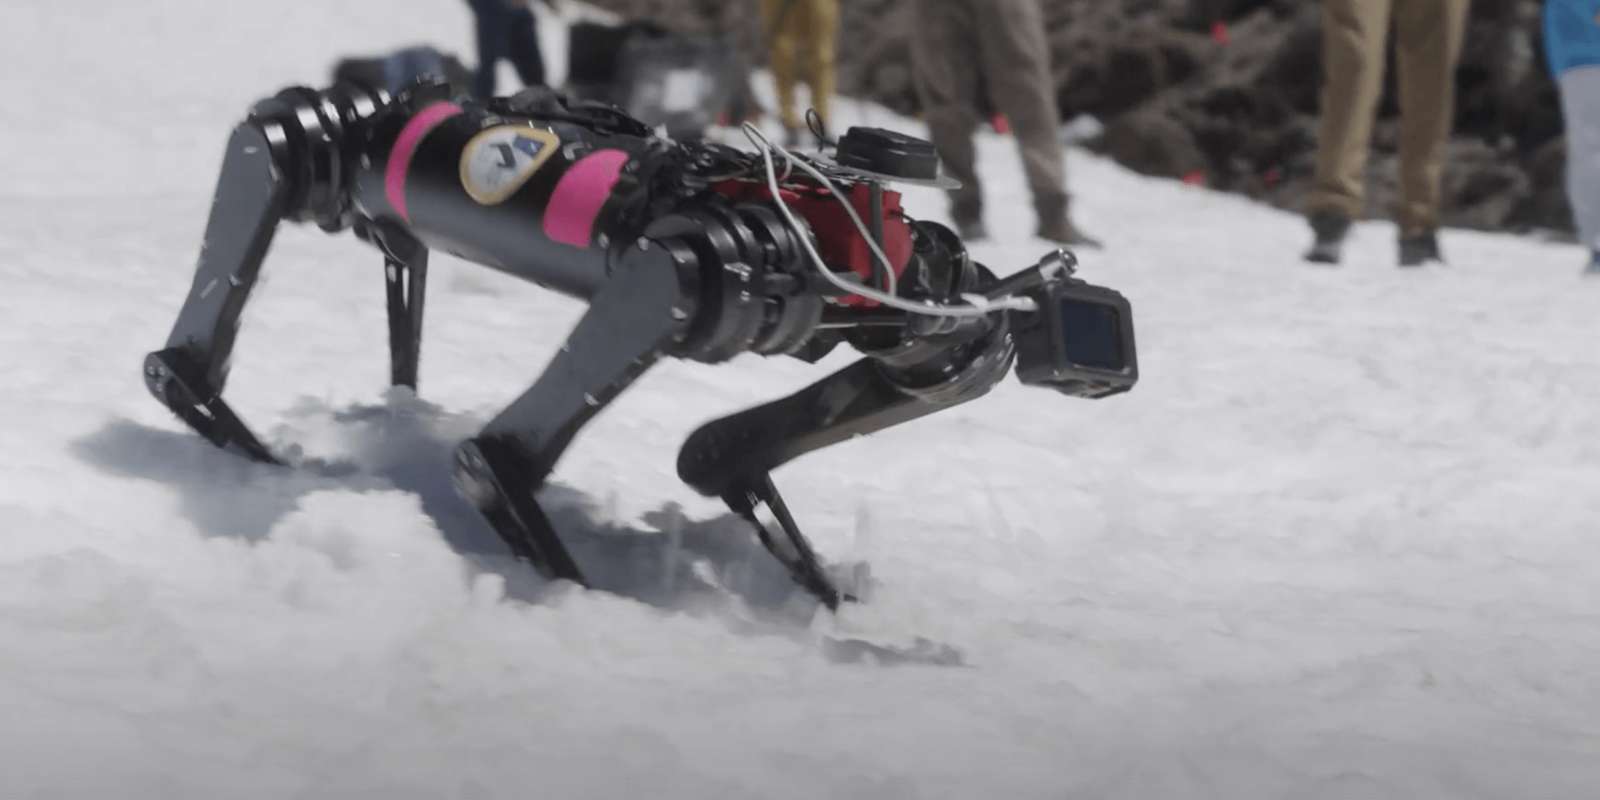 NASA is training these robots in the mountains for future missions to the moon